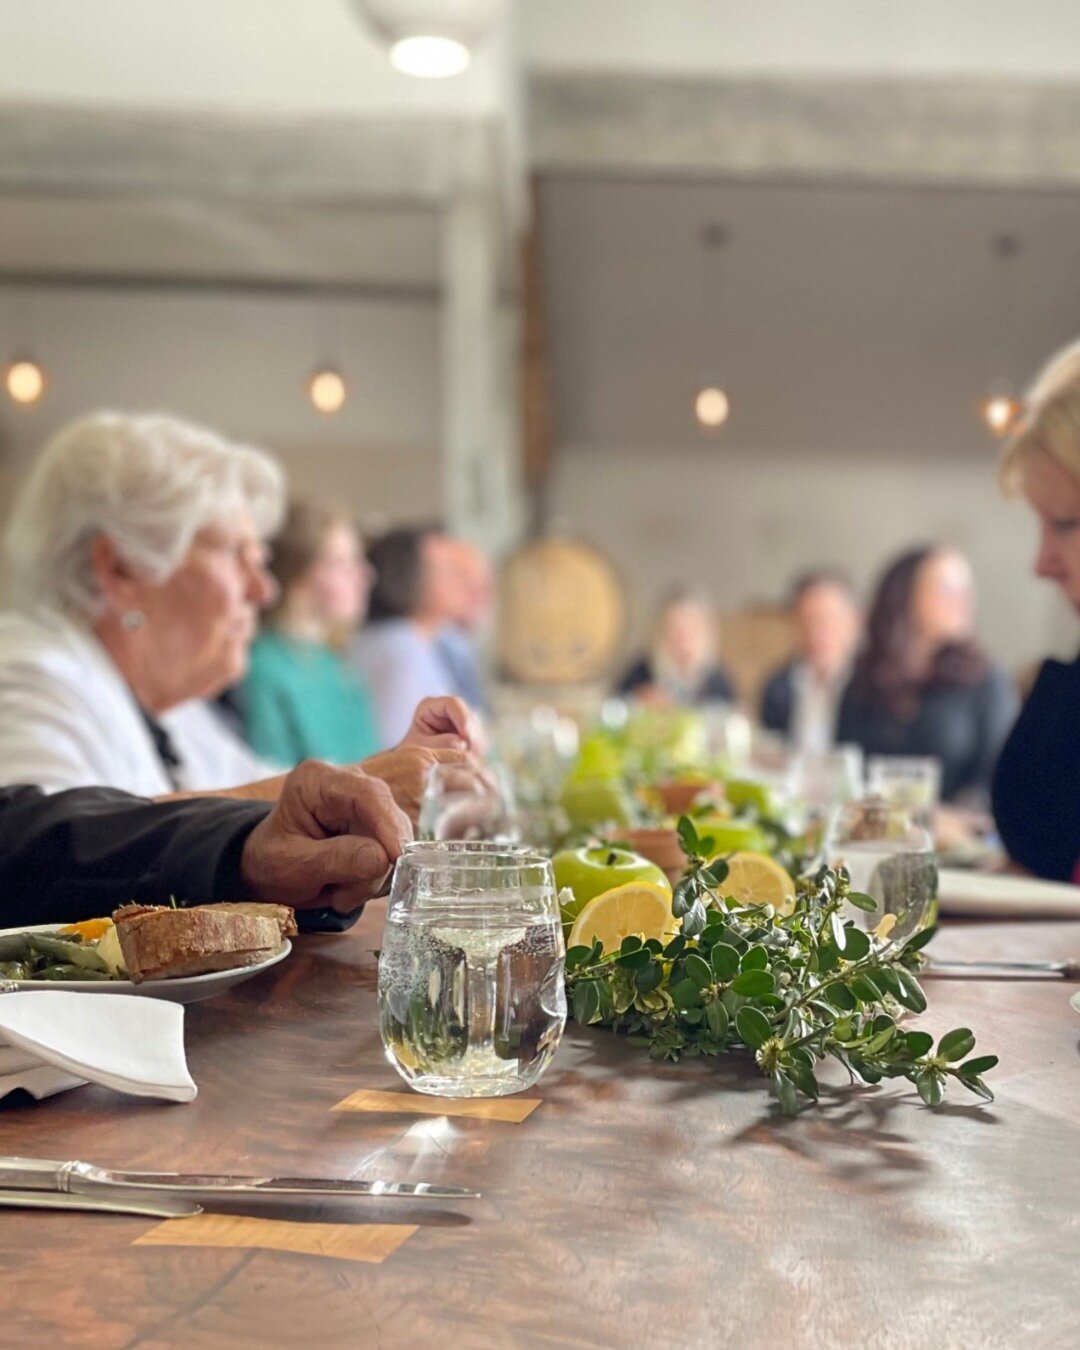 Our first chef-prepaired, cider-paired dinner was a success! If you missed out on this one, never fear! We have our second coming up quick- Join us Friday June 2nd for our Spring into Summer dinner out at our tasting grounds.

Aside from the chef-pre